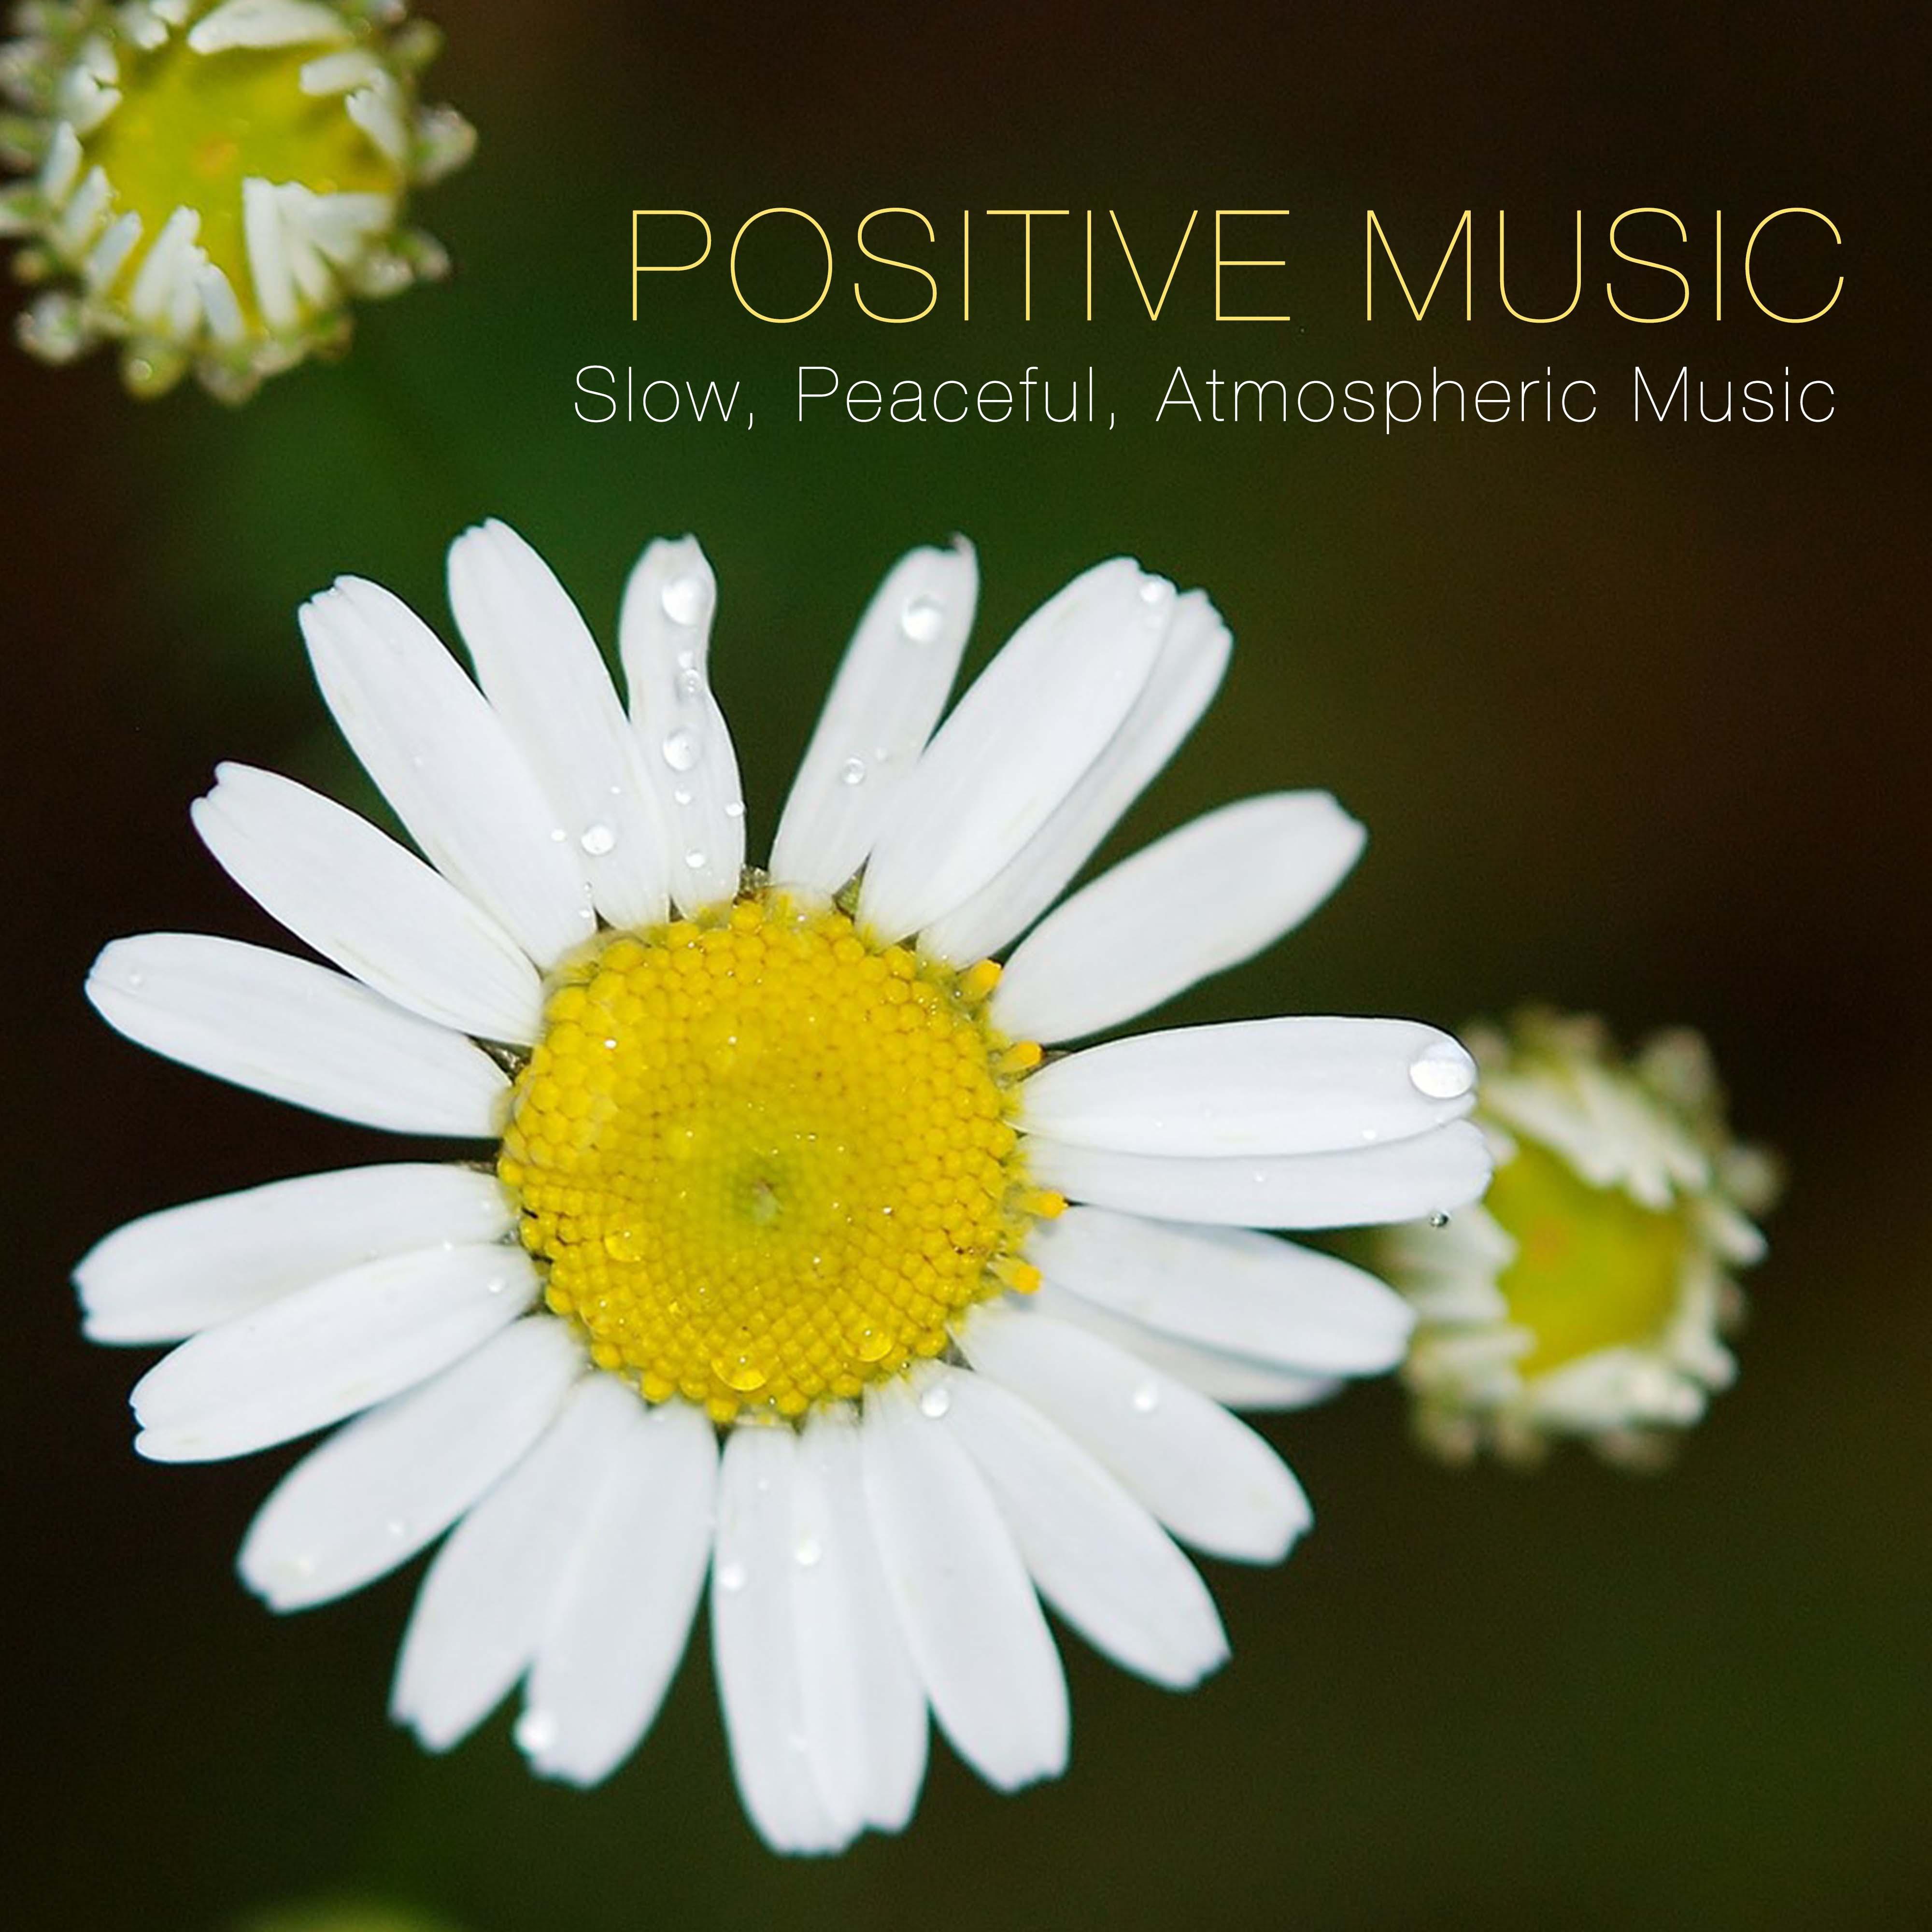 Positive Music: Slow, Peaceful, Atmospheric Music to Calm the Mind